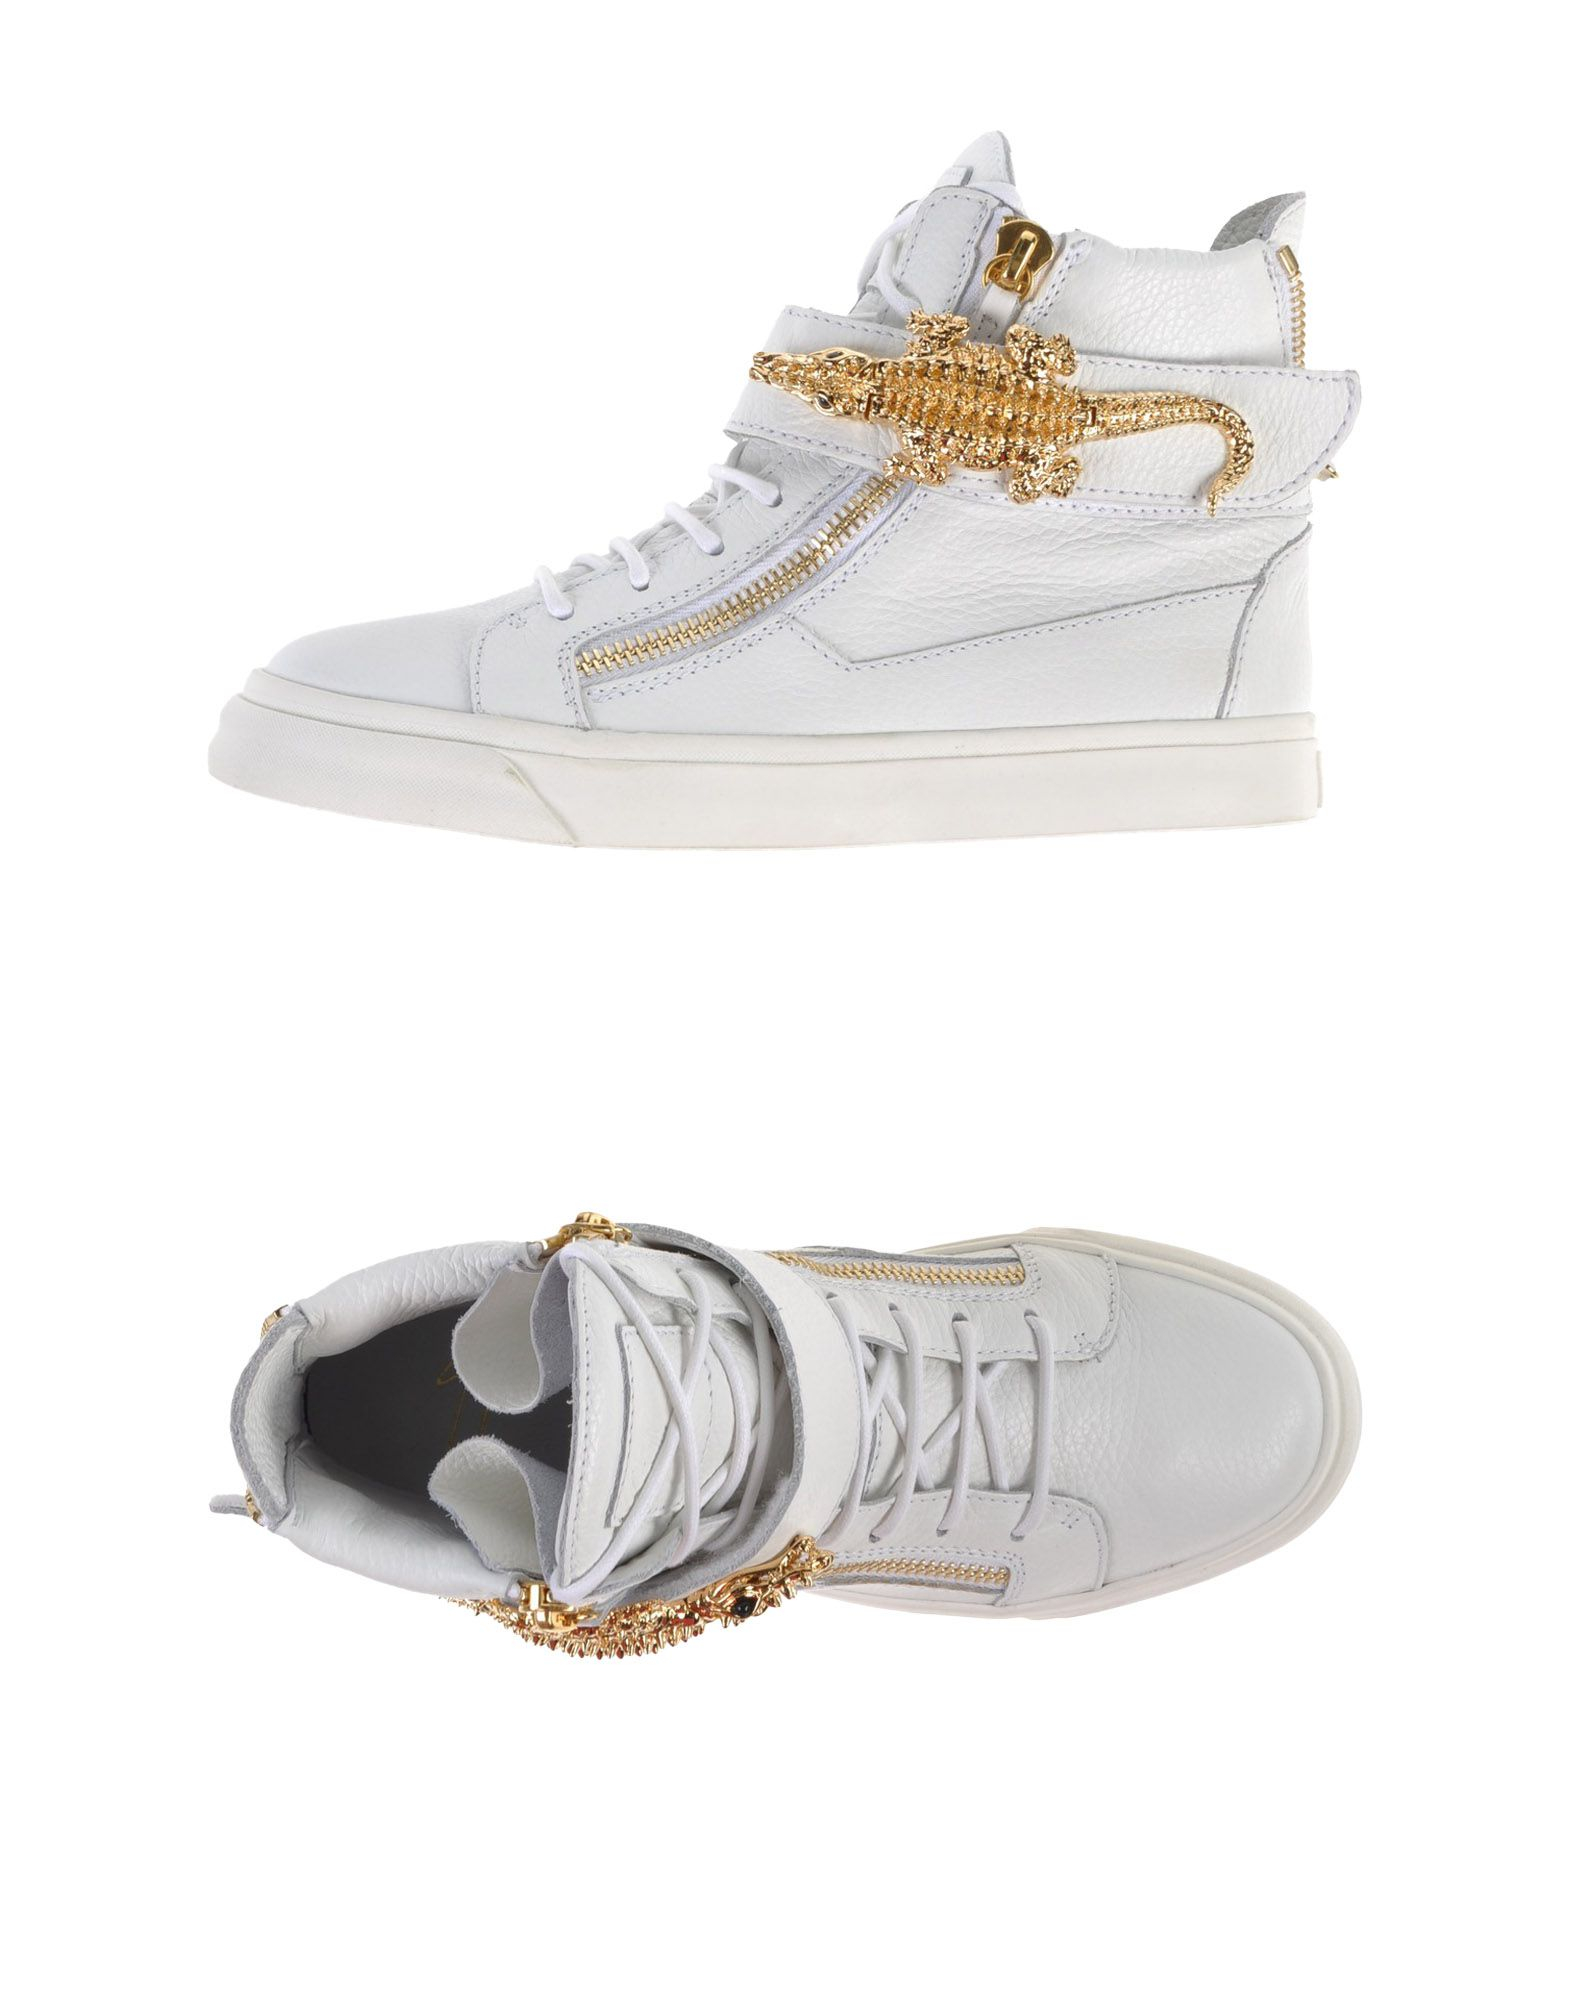 Giuseppe zanotti 20mm Leather Gold Eagle Sneakers in White | Lyst